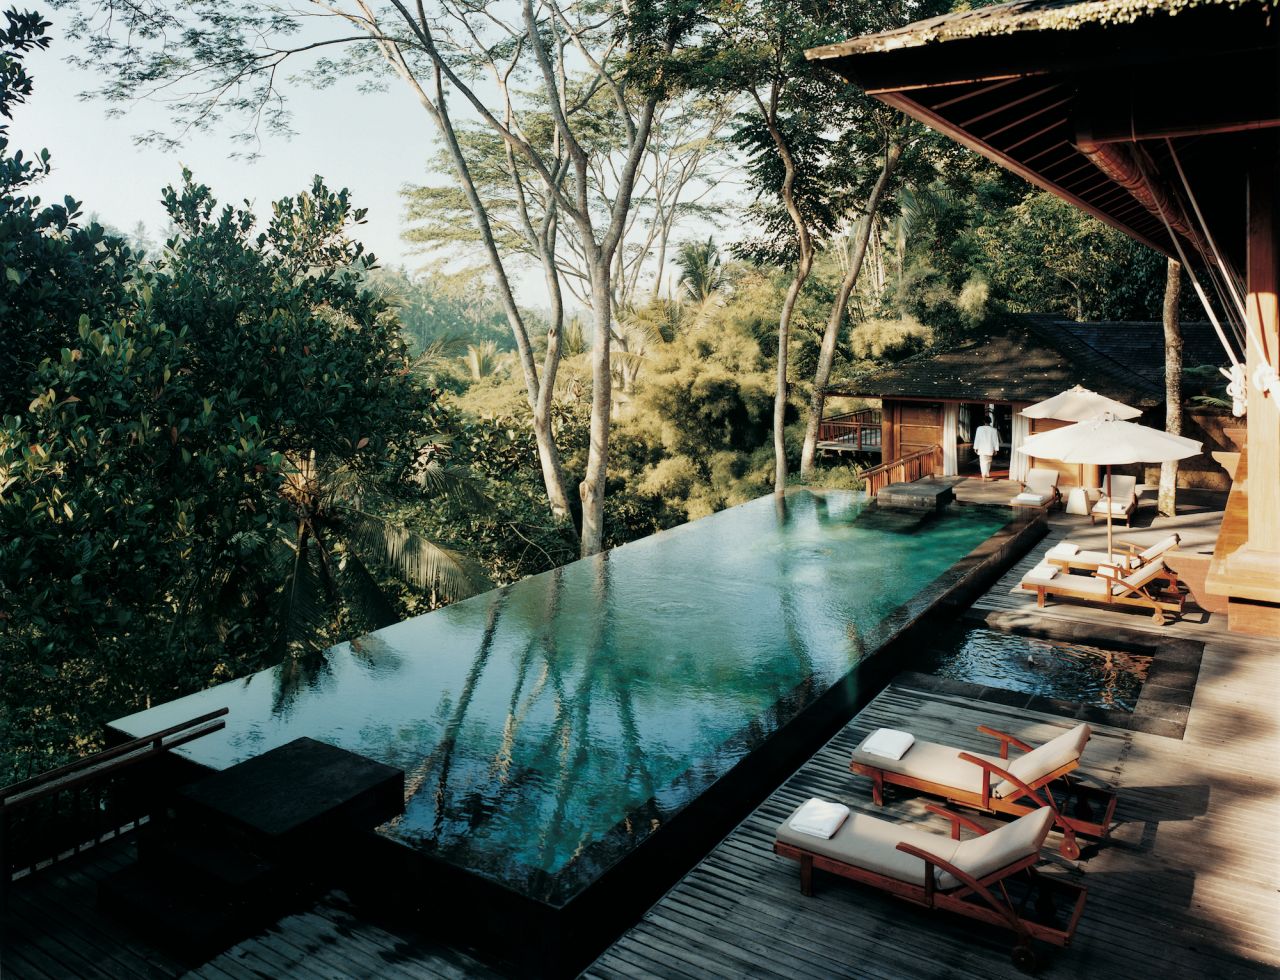 Speaking of luxury, Ubud's COMO Shambhala Estate is among the top places to base yourself in Bali's cultural capital. 